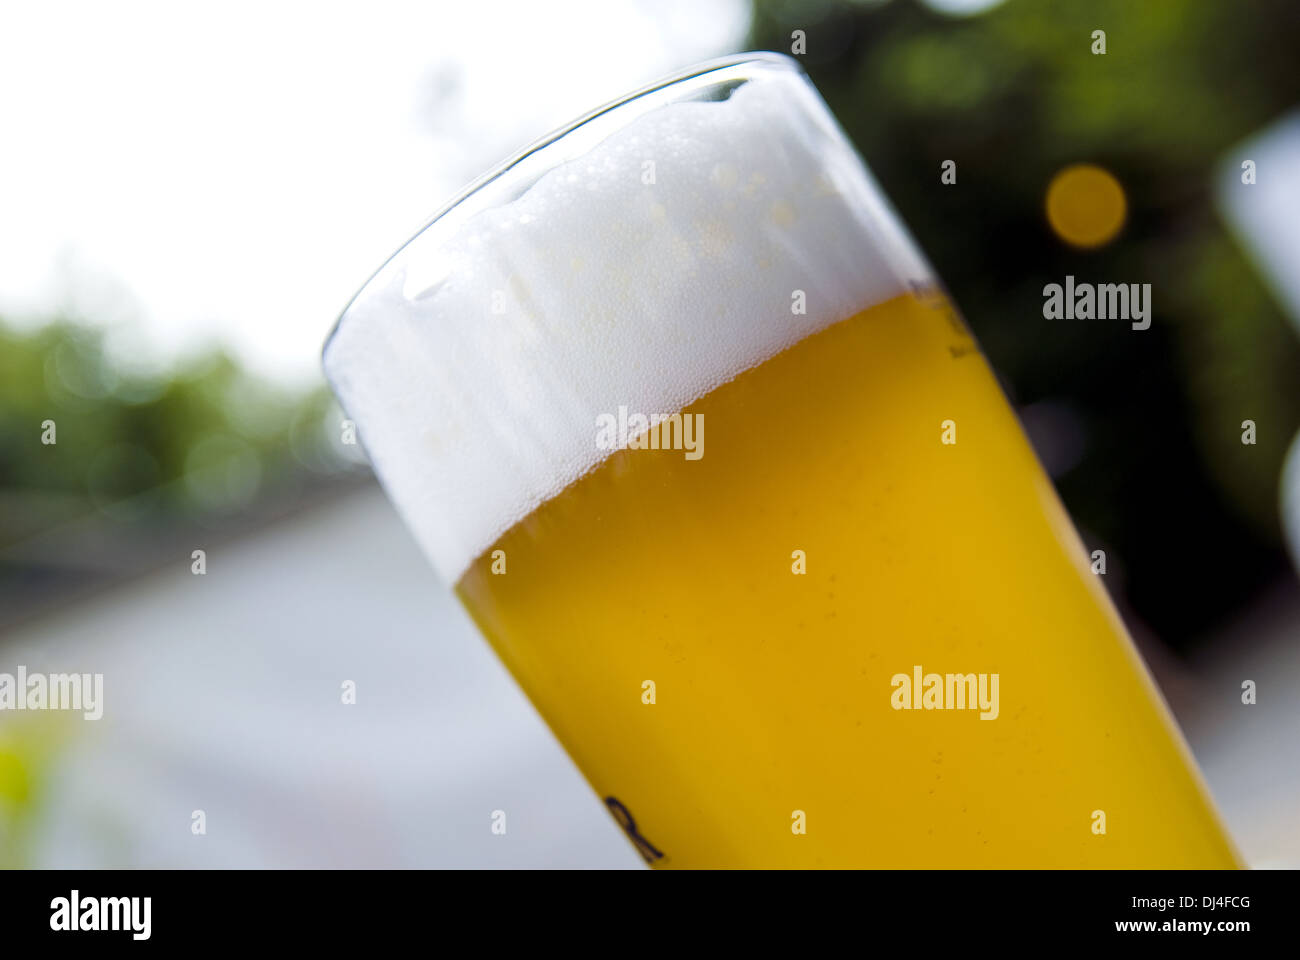 a full glass of Hefeweizen beer Stock Photo